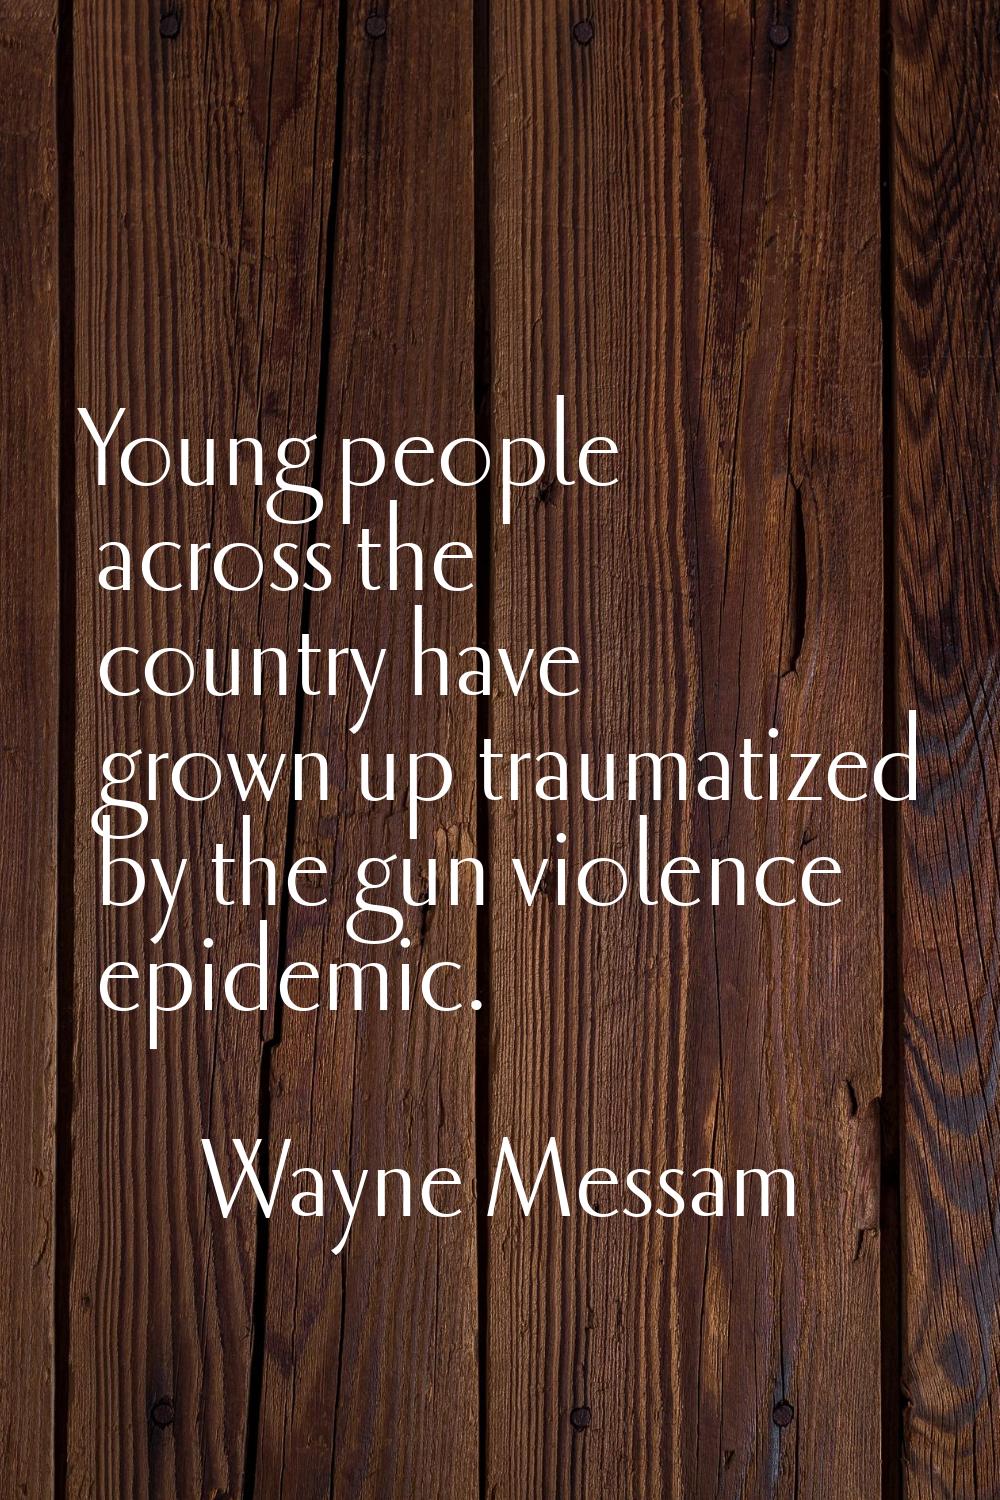 Young people across the country have grown up traumatized by the gun violence epidemic.